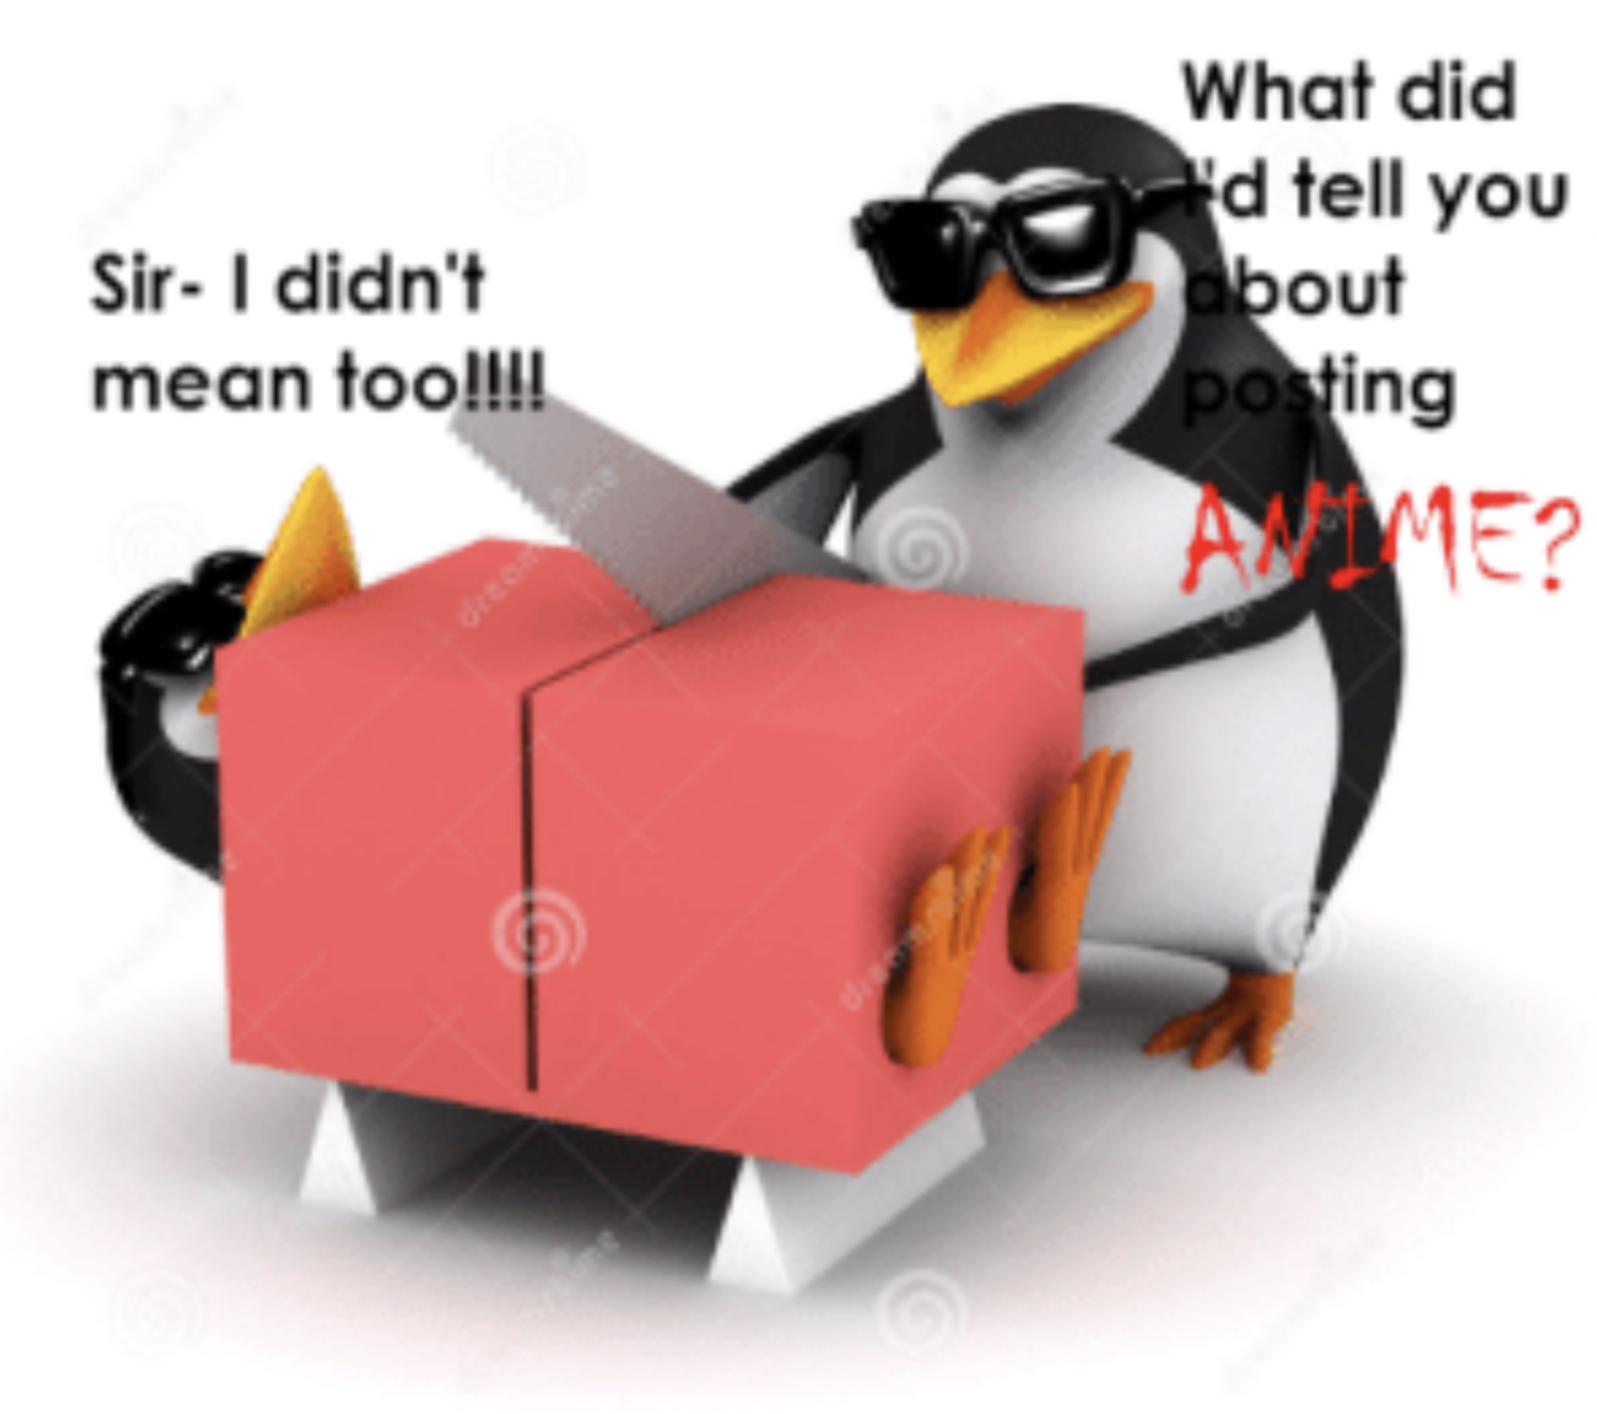 CONTRABAND  No Anime Penguin  Know Your Meme